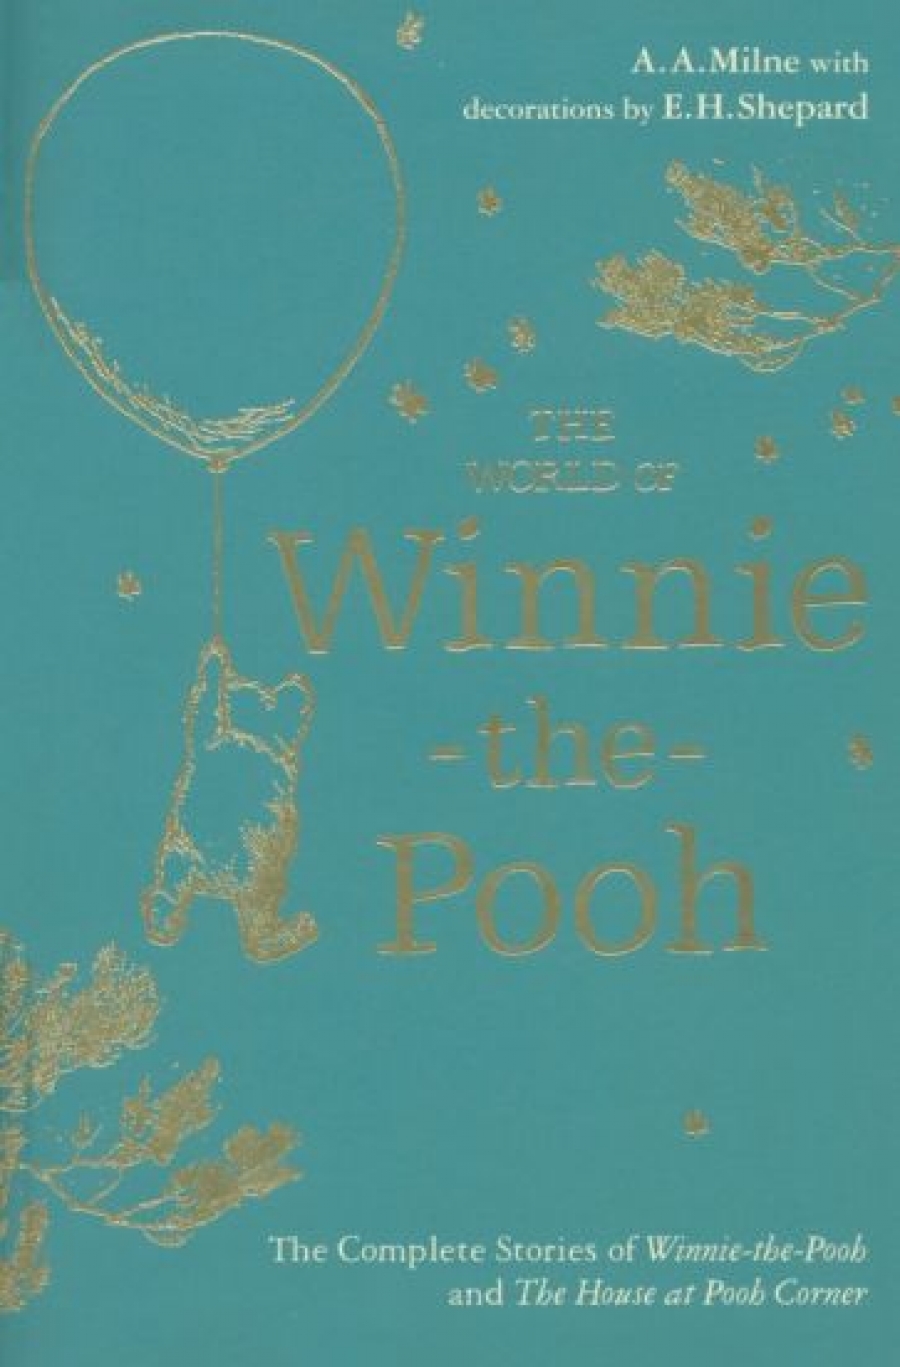 Milne A. A. Winnie-the-Pooh. The World of Winnie-the-Pooh 